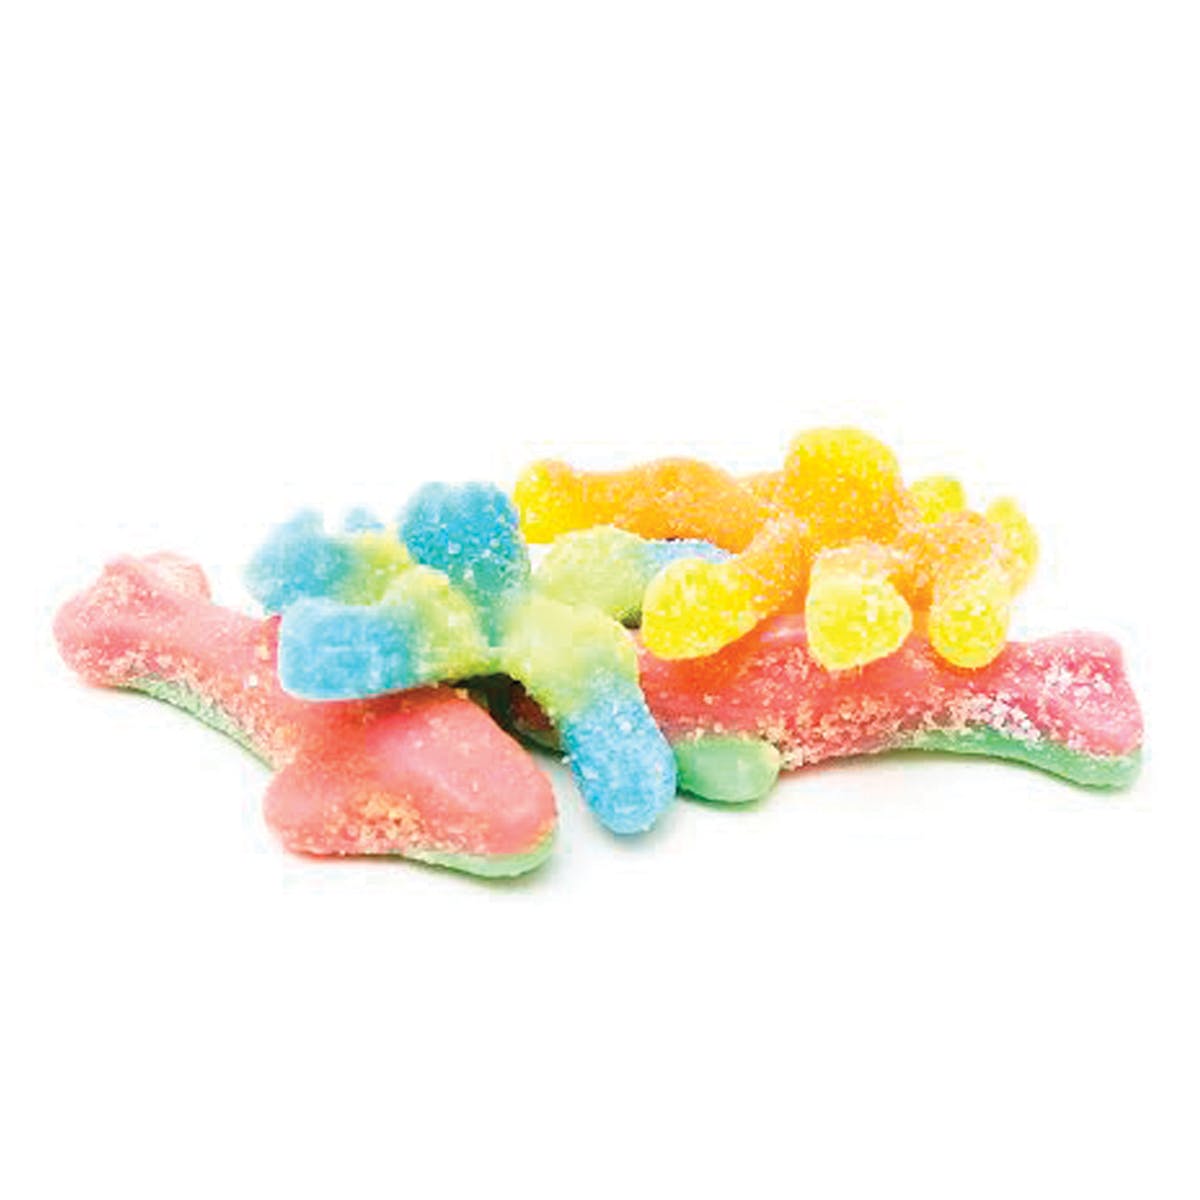 Sour Sea Creatures 250mg